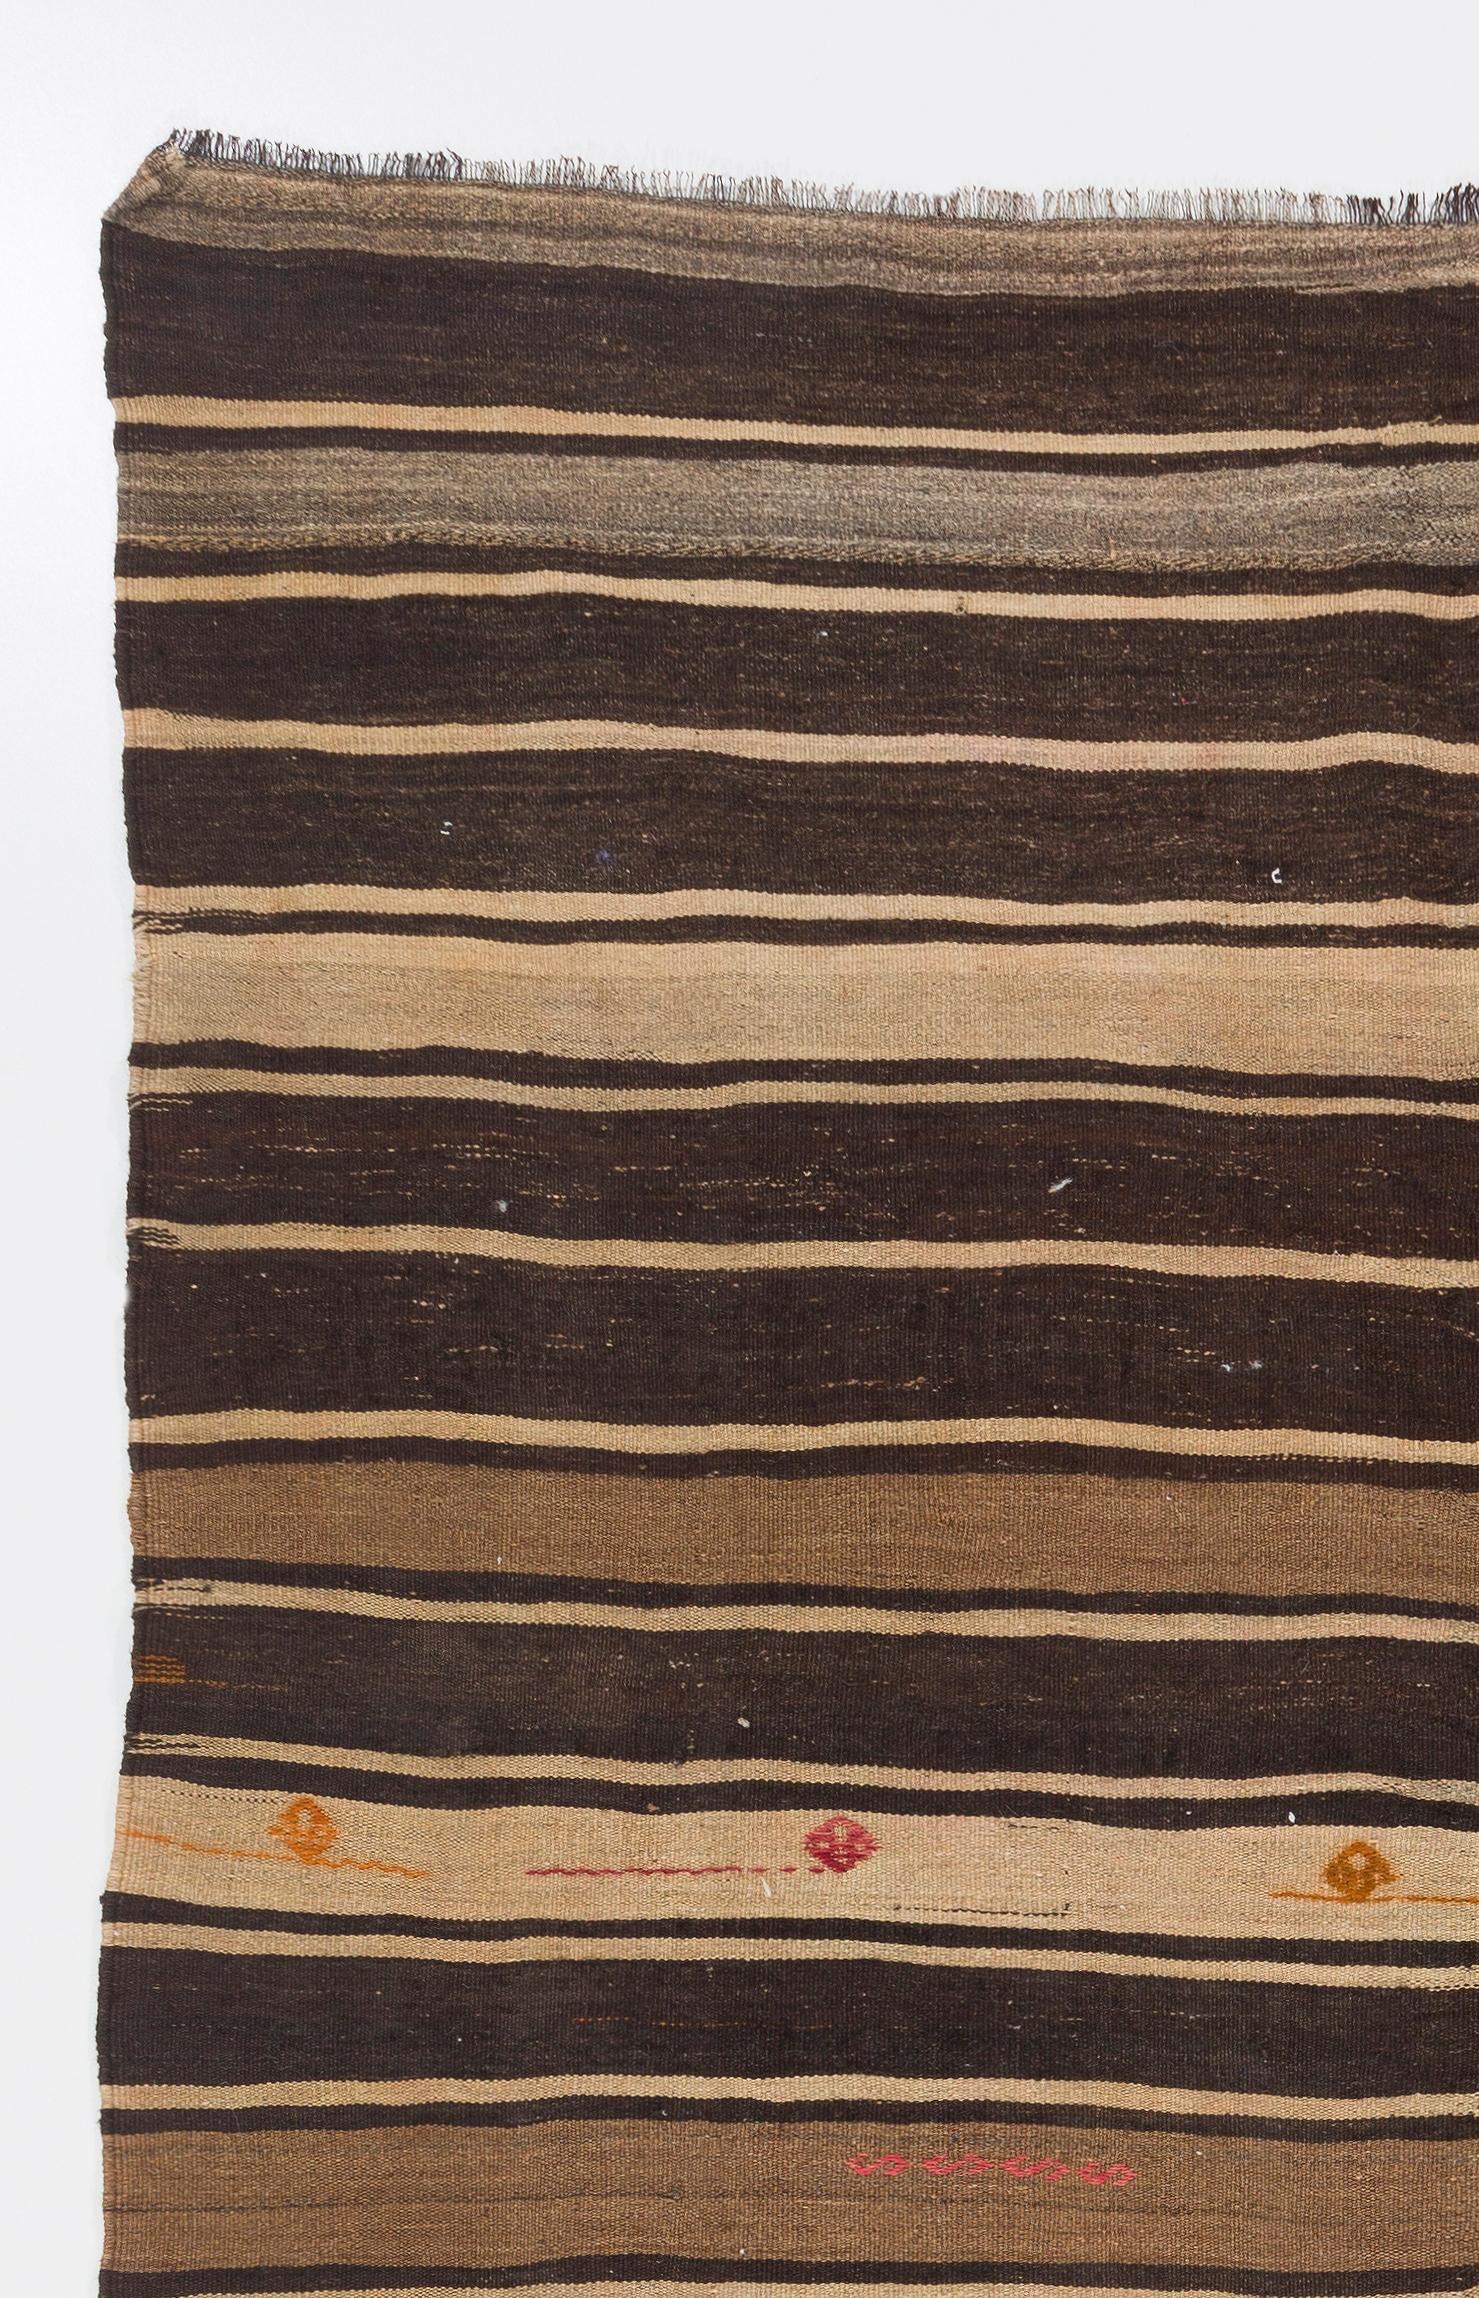 A handwoven vintage banded central Anatolian kilim made entirely of un-dyed natural wool featuring earthy tones of light brown, dark brown and ivory. Dainty little brocades sparsely scattered across the kilim create an element of surprise and charm.